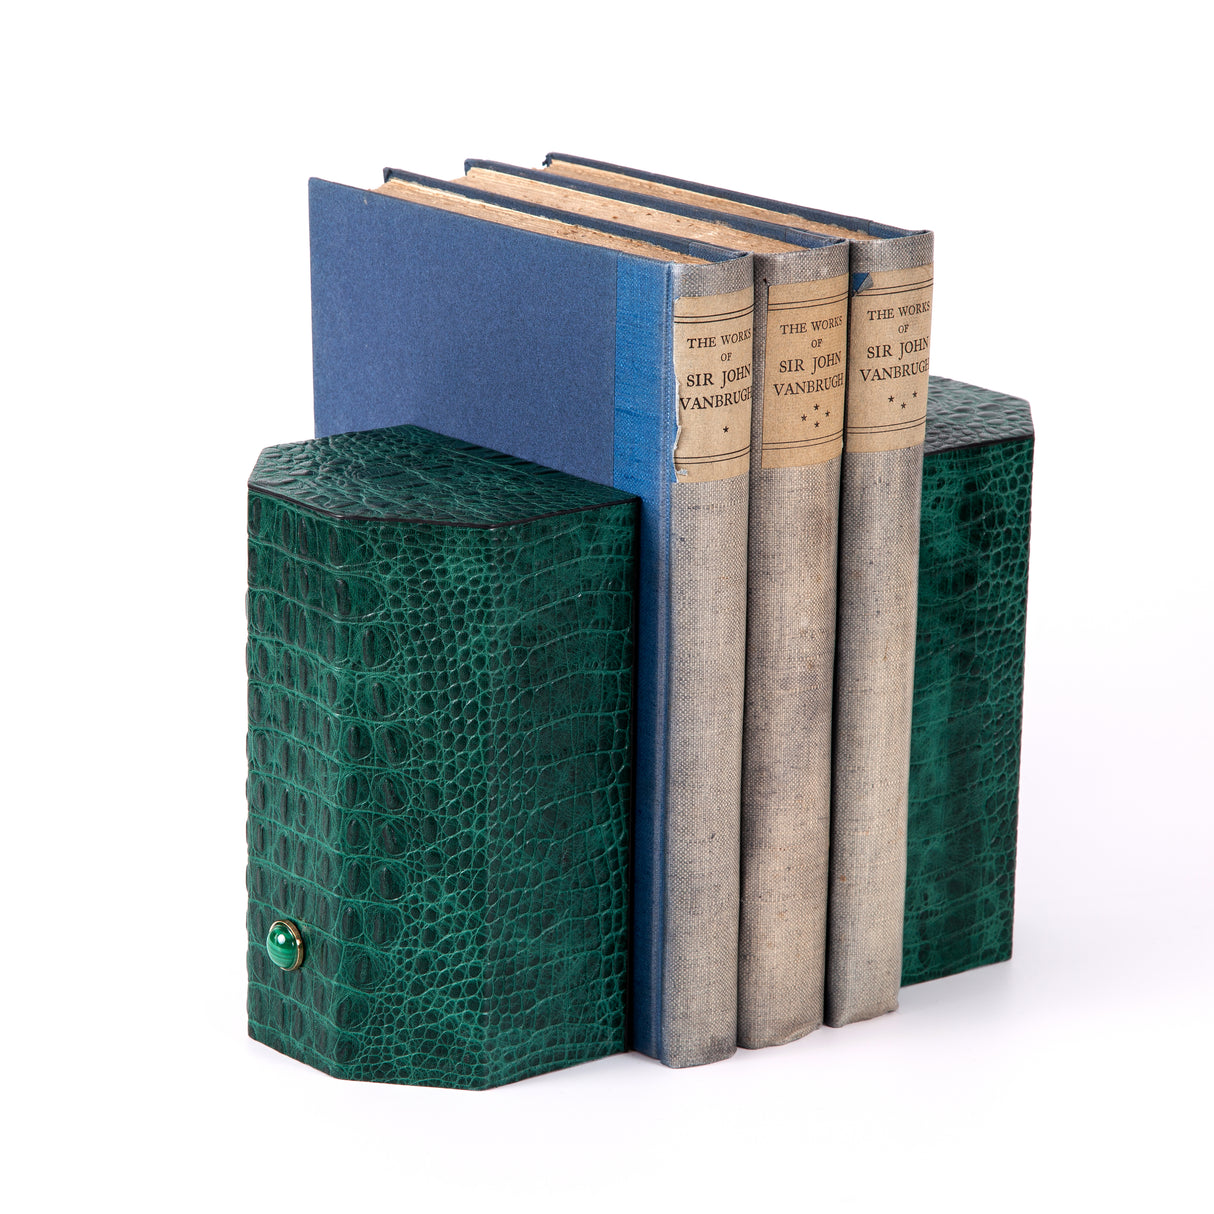 Croco bookends to add style and exotica to any library.  Solid geometric blocks of wood covered in leather are the essential jewels on a bookshelf.  %100 Leather (Embossed Croco)   Jeweled with natural malachite stones